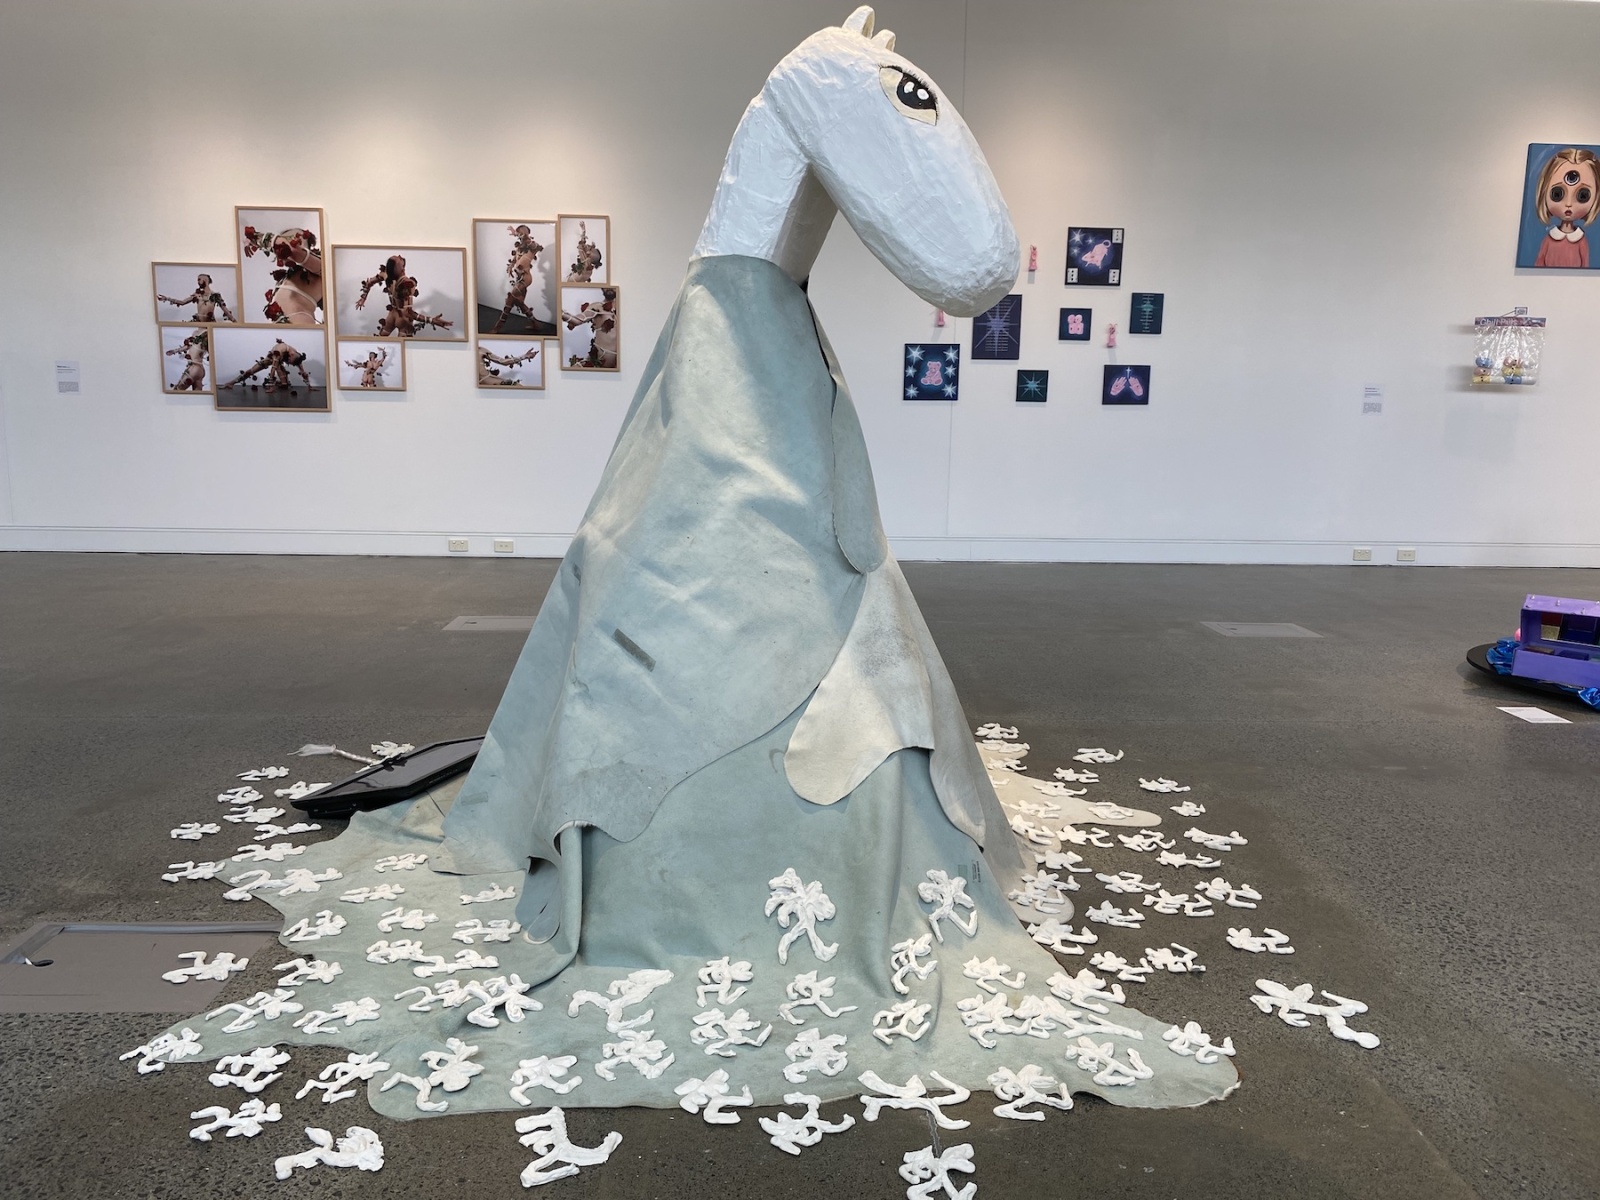 A large styrofoam horse head sits on top of a skirt made of cow hide, around the base of which sits small white plaster shapes and a television screen.